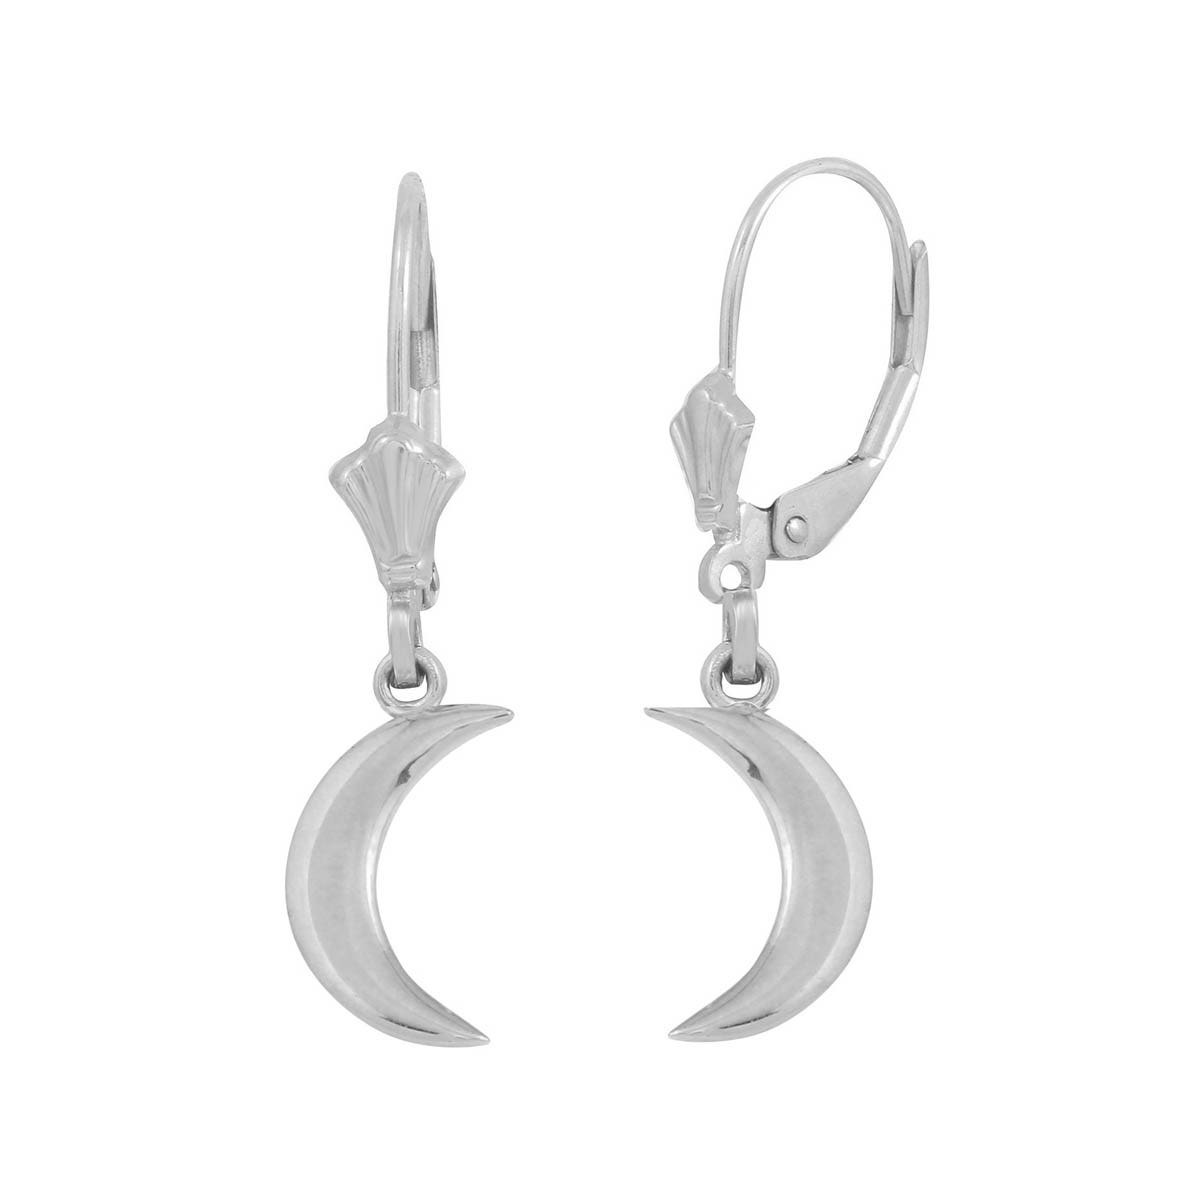 Gents White Earrings - Gold Boutique GOOFASH